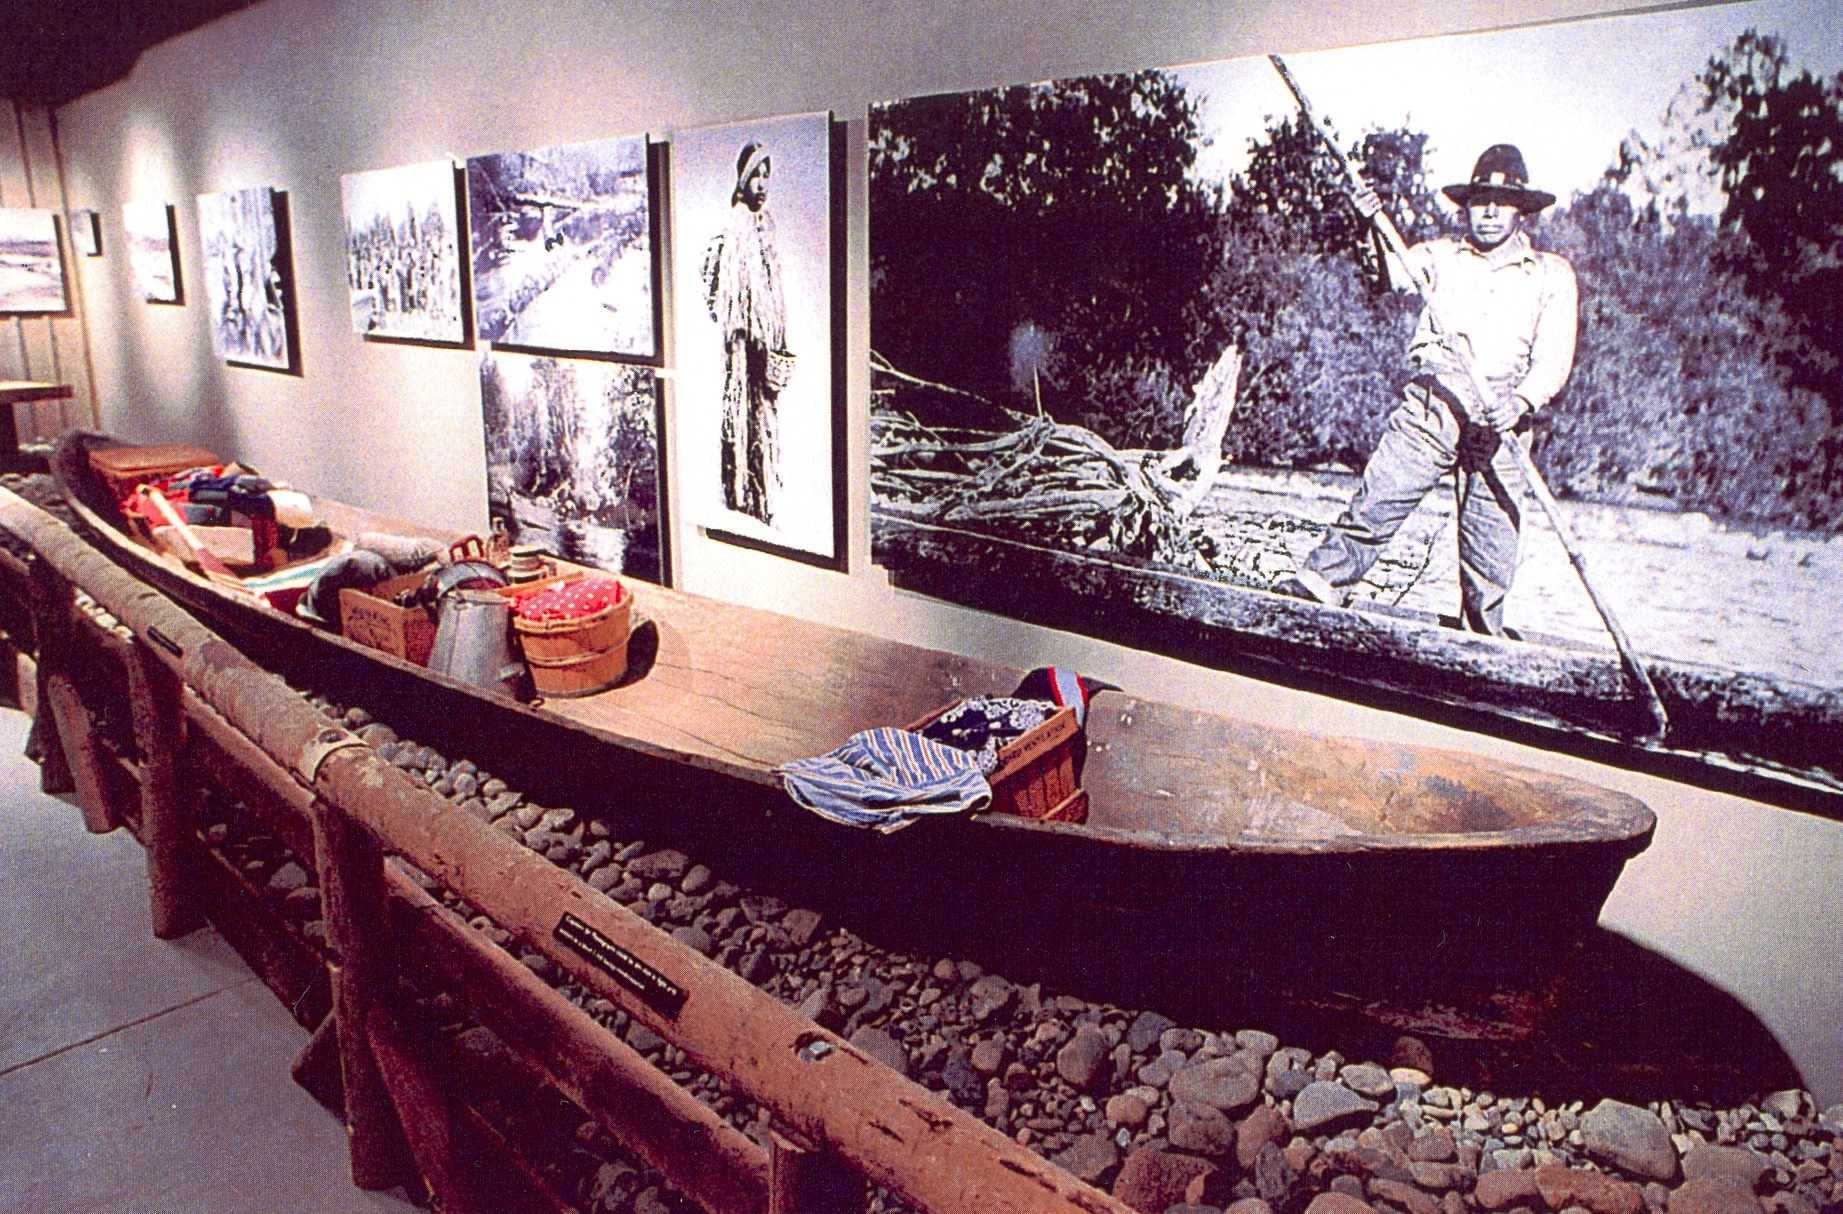 One of the exhibits at White River Valley Museum